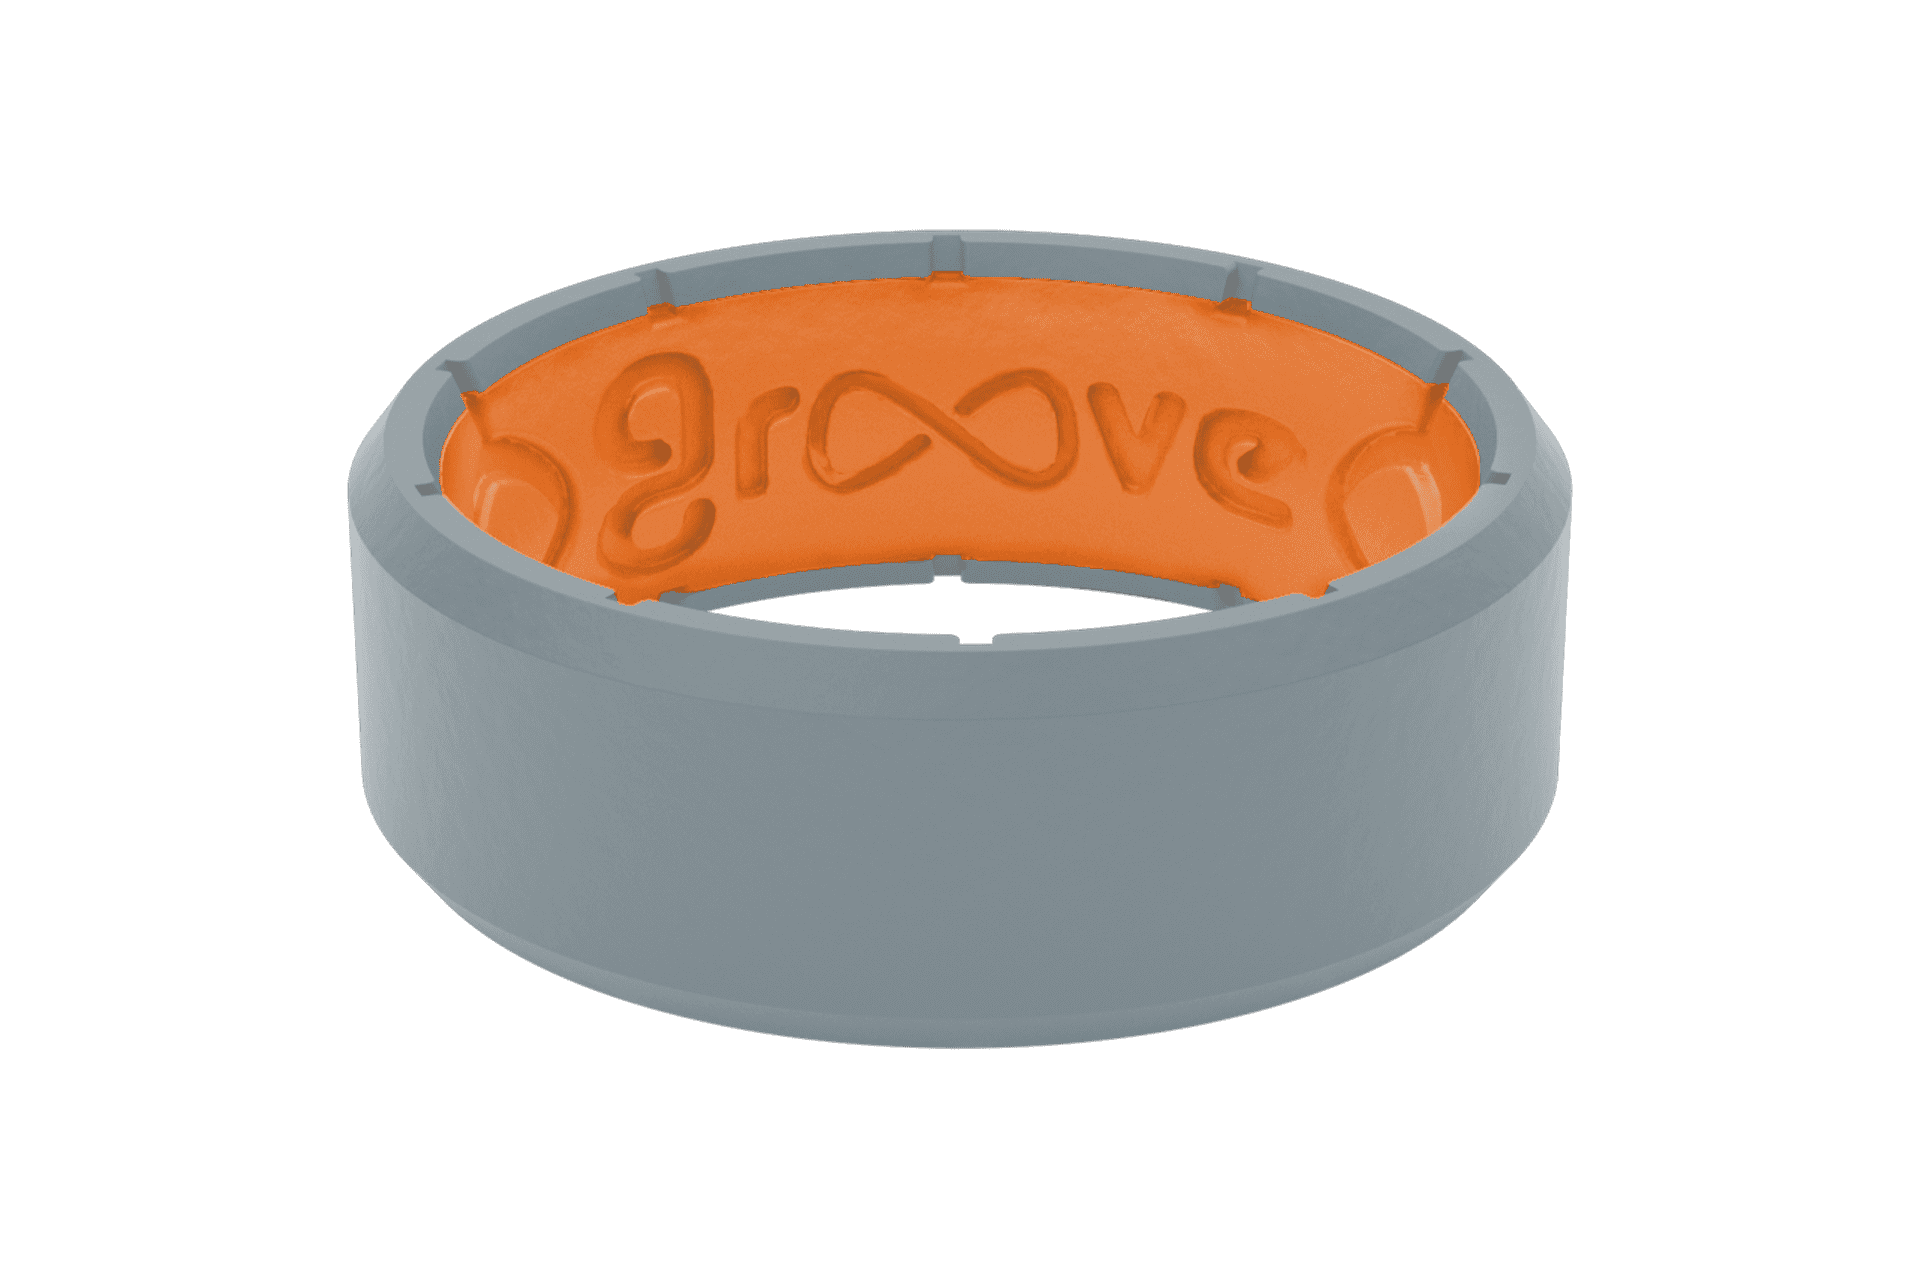 Groove Life Edge Storm Grey Silicone Ring by Groove Life - Breathable Rubber Wedding Rings for Men, Lifetime Coverage, Unique Design, Comfort Fit Ring - Size 9